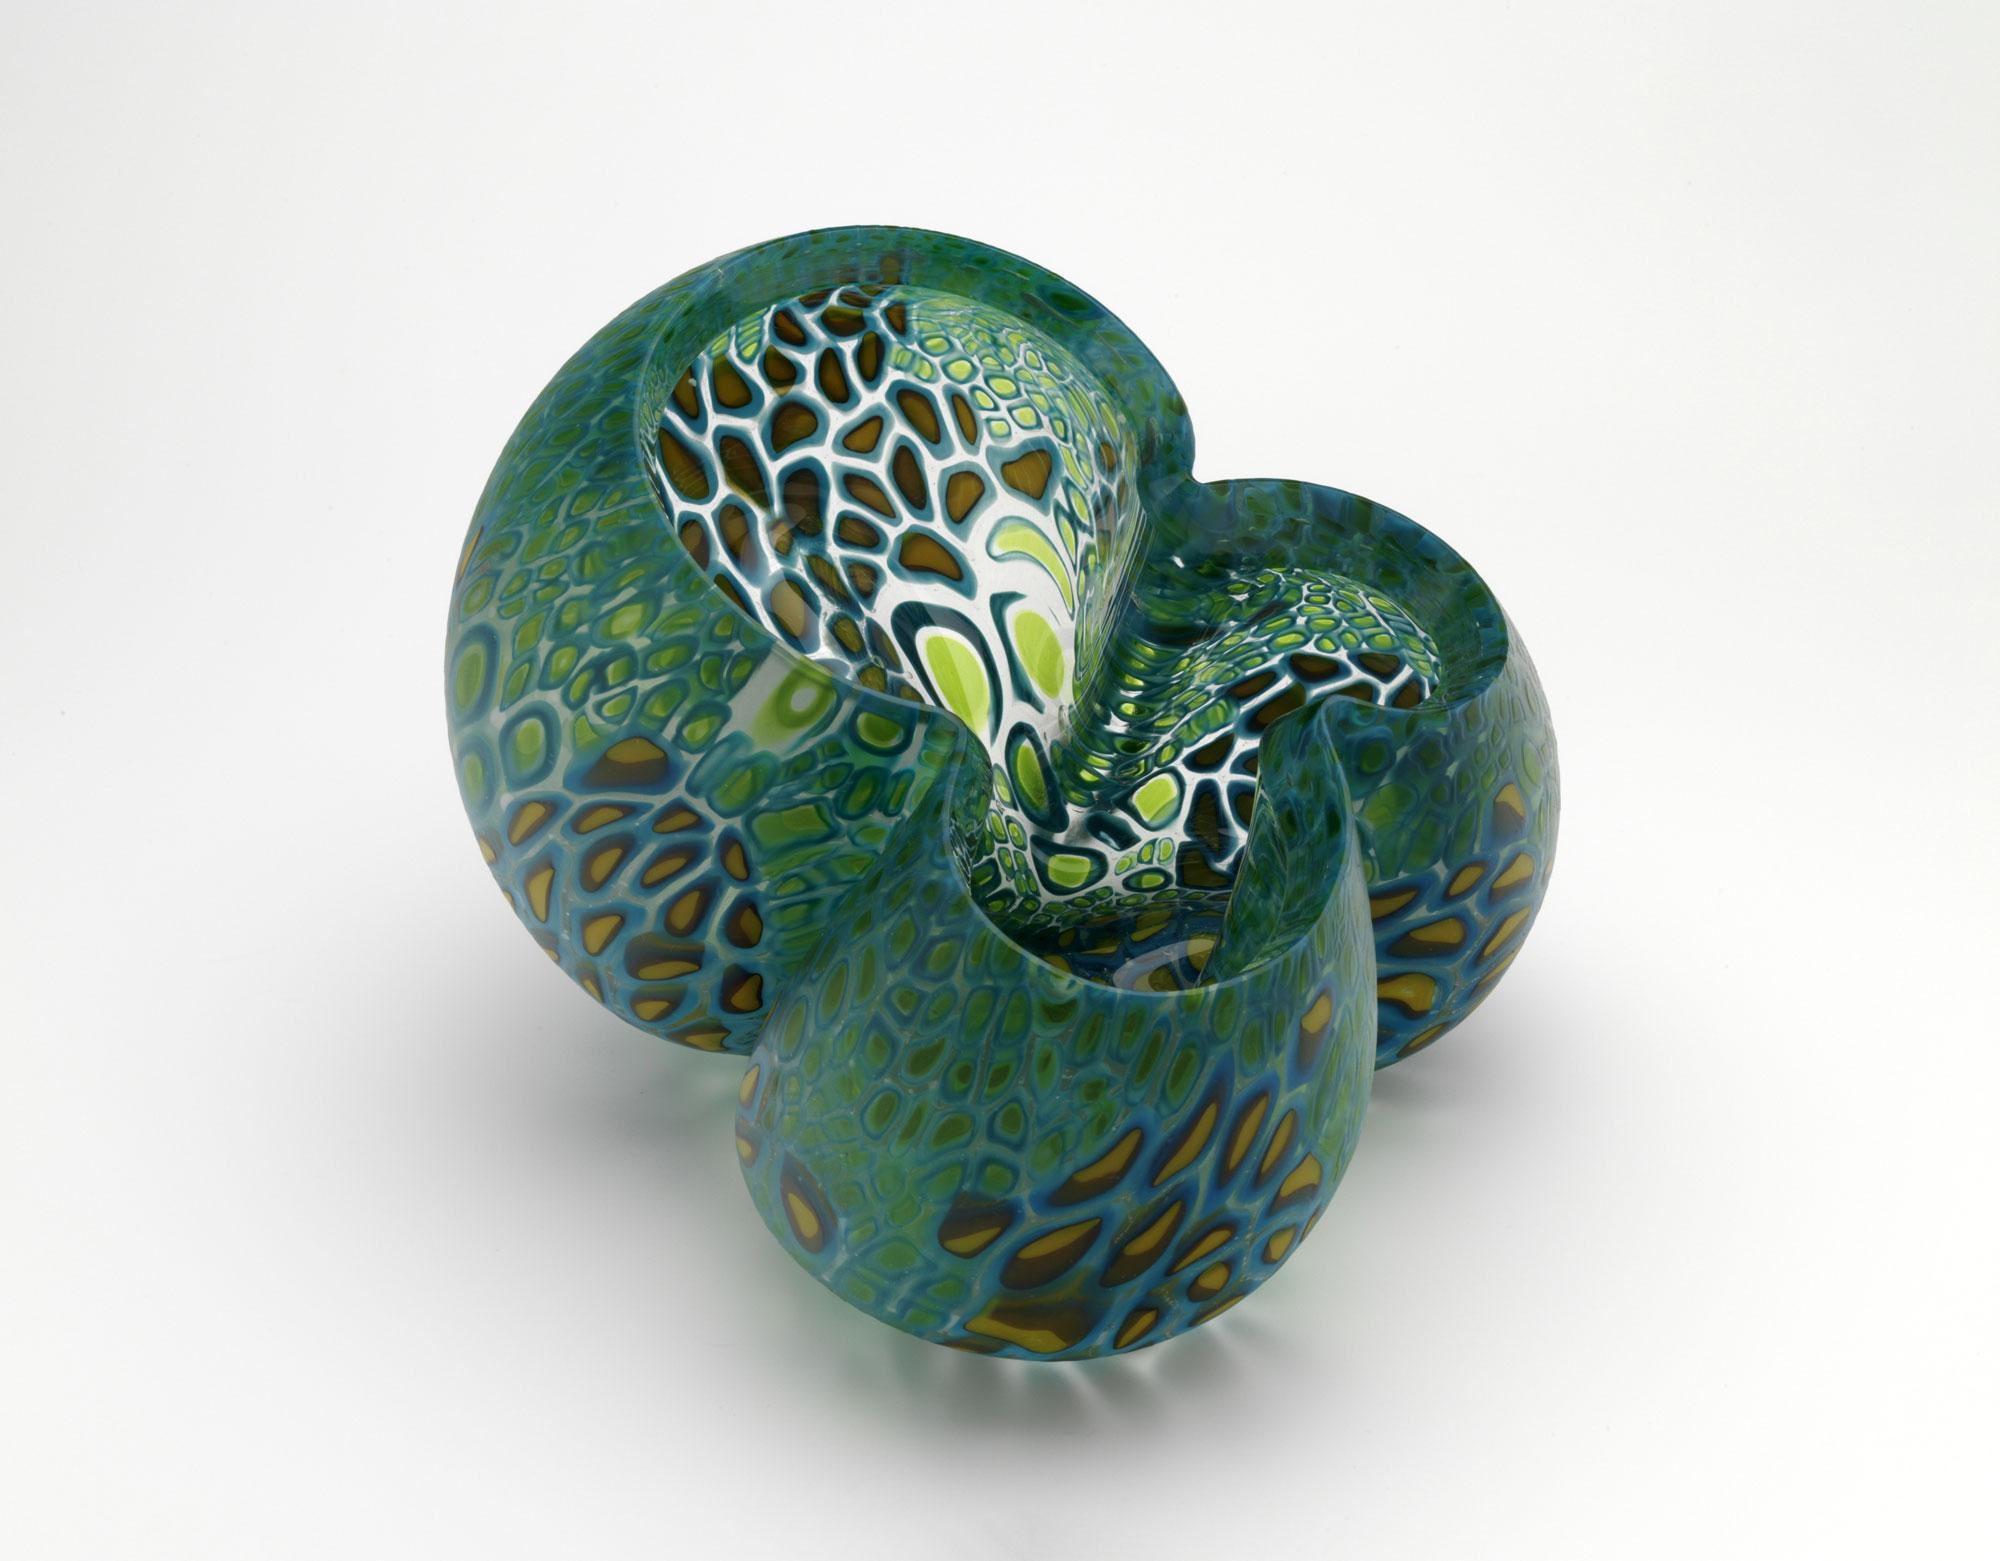 Barbara Nanning
Colorful Shadows I, 2018
Glass, blown, hand-formed, sandblasting
Unique
C. 7.5 in. H x 9 in. W x 9 in. D.

 